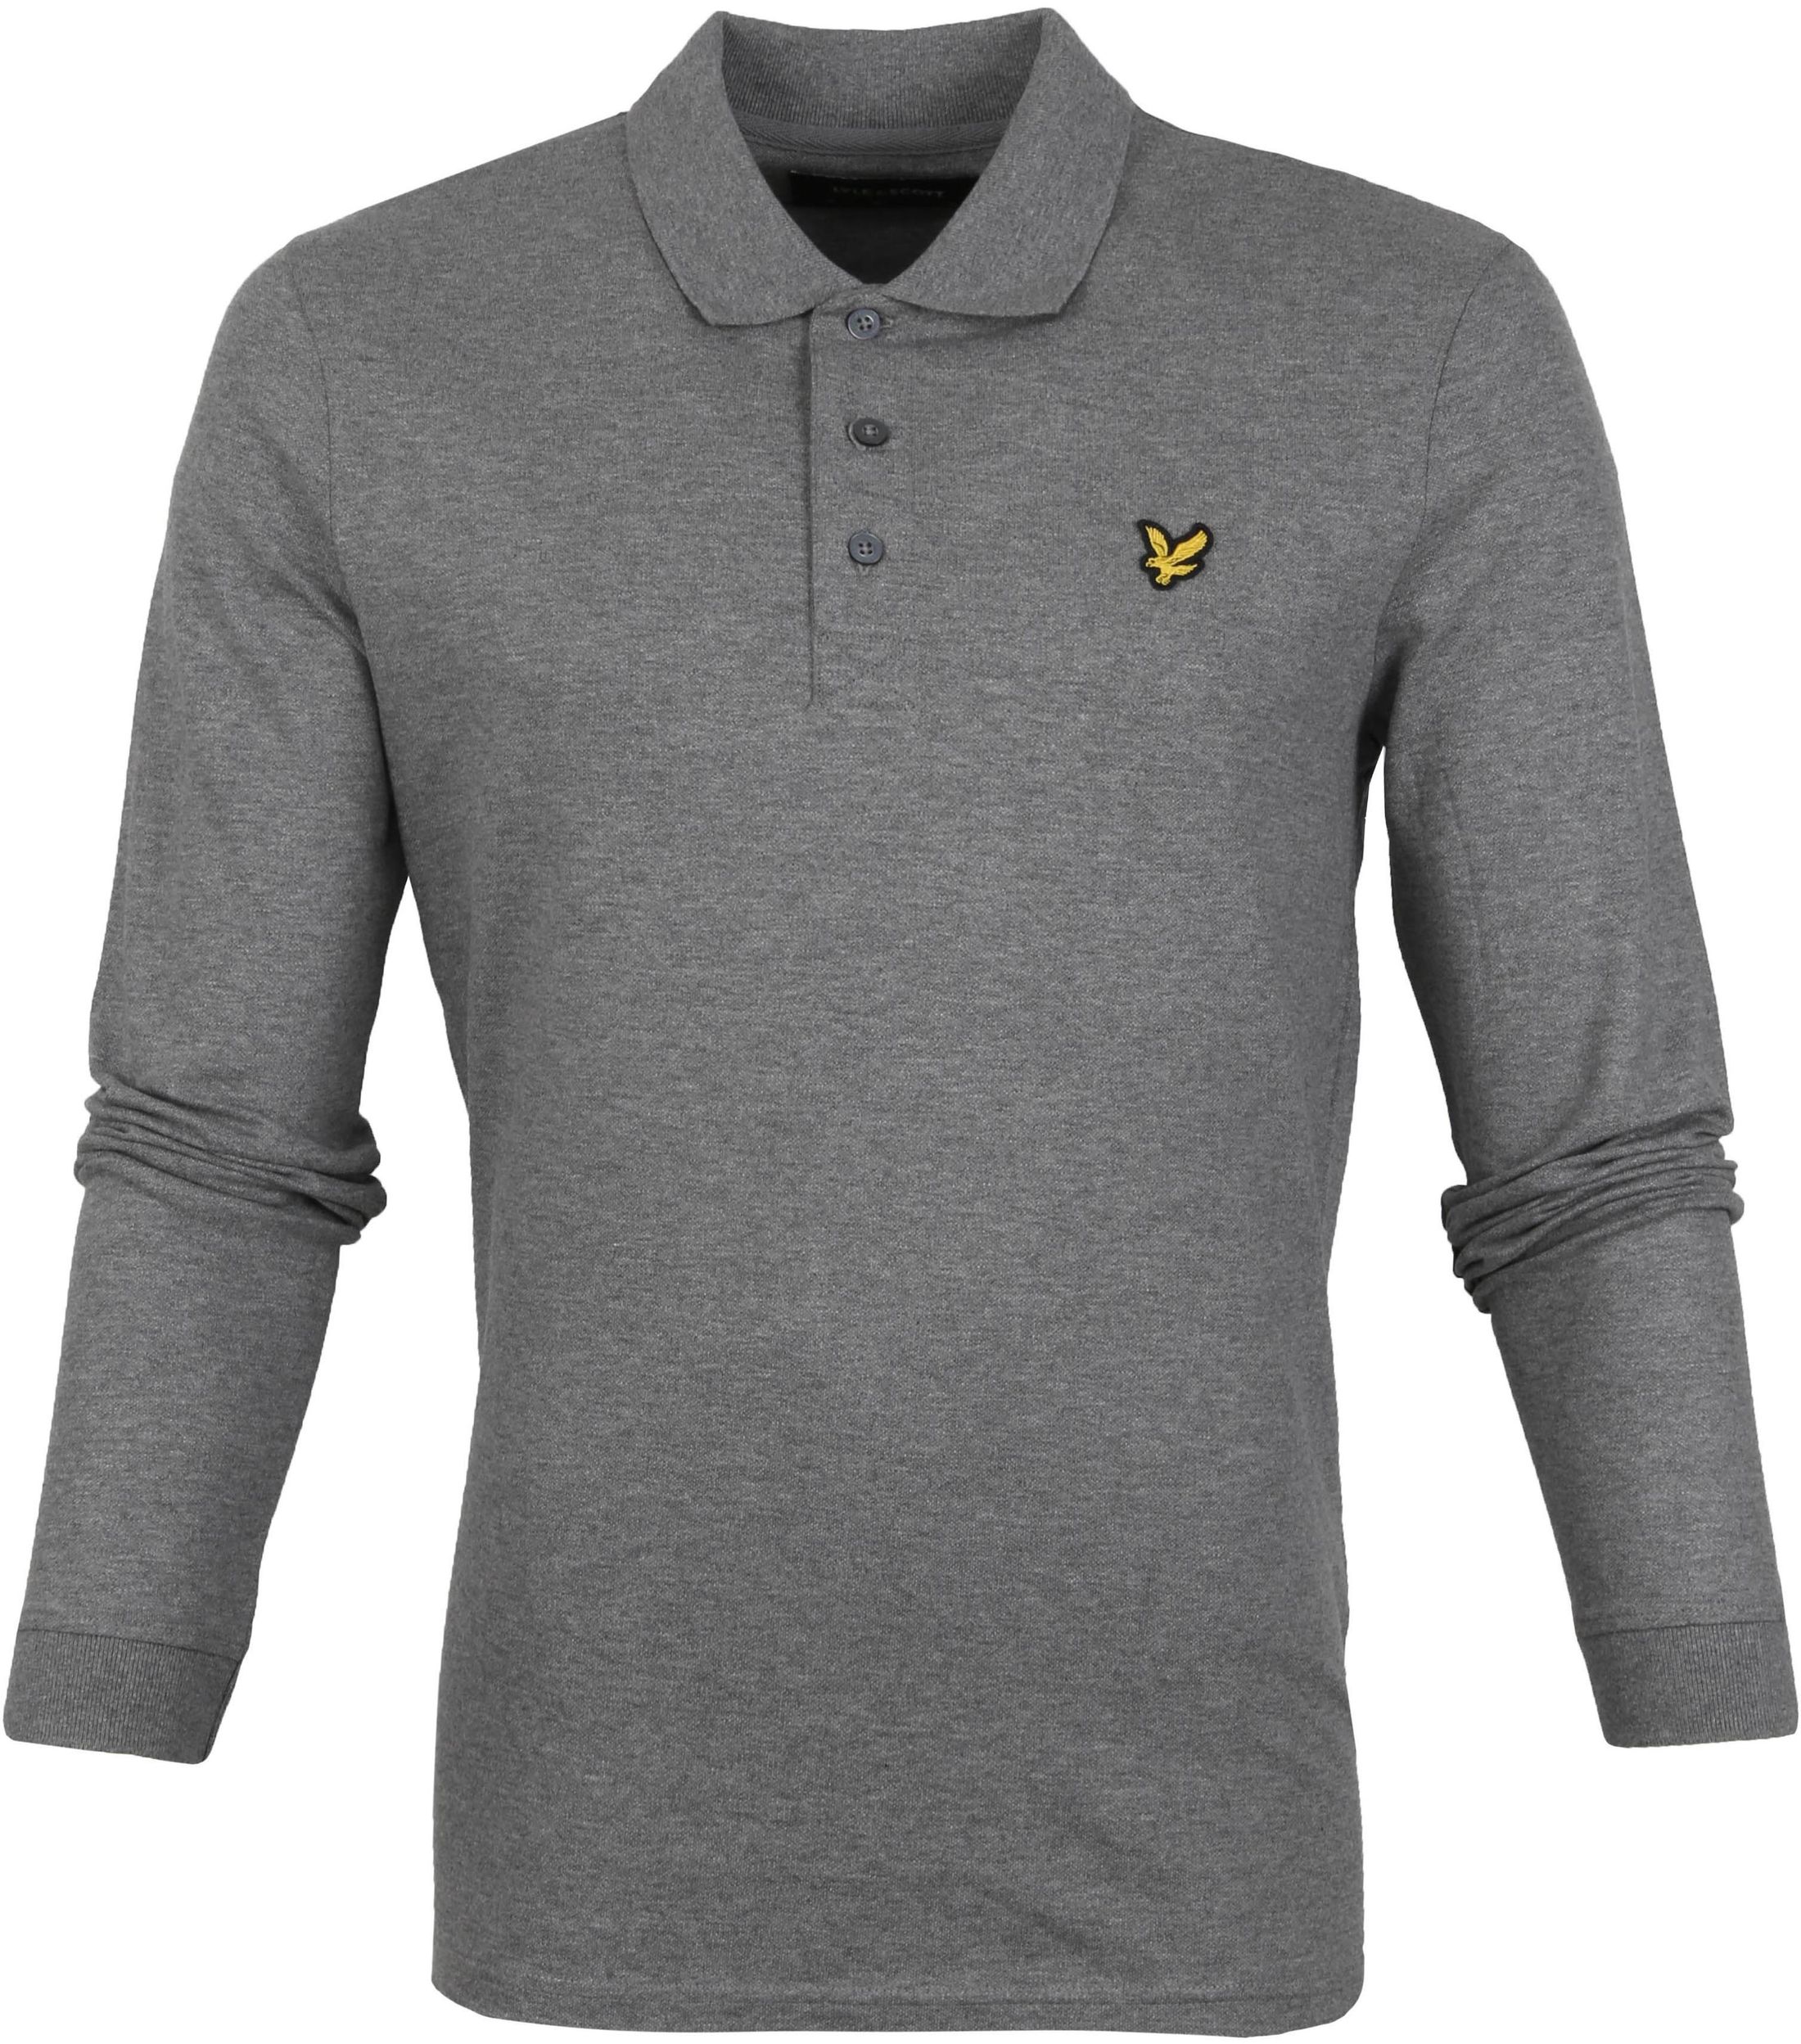 Lyle and Scott Longsleeve Polo Grey size S